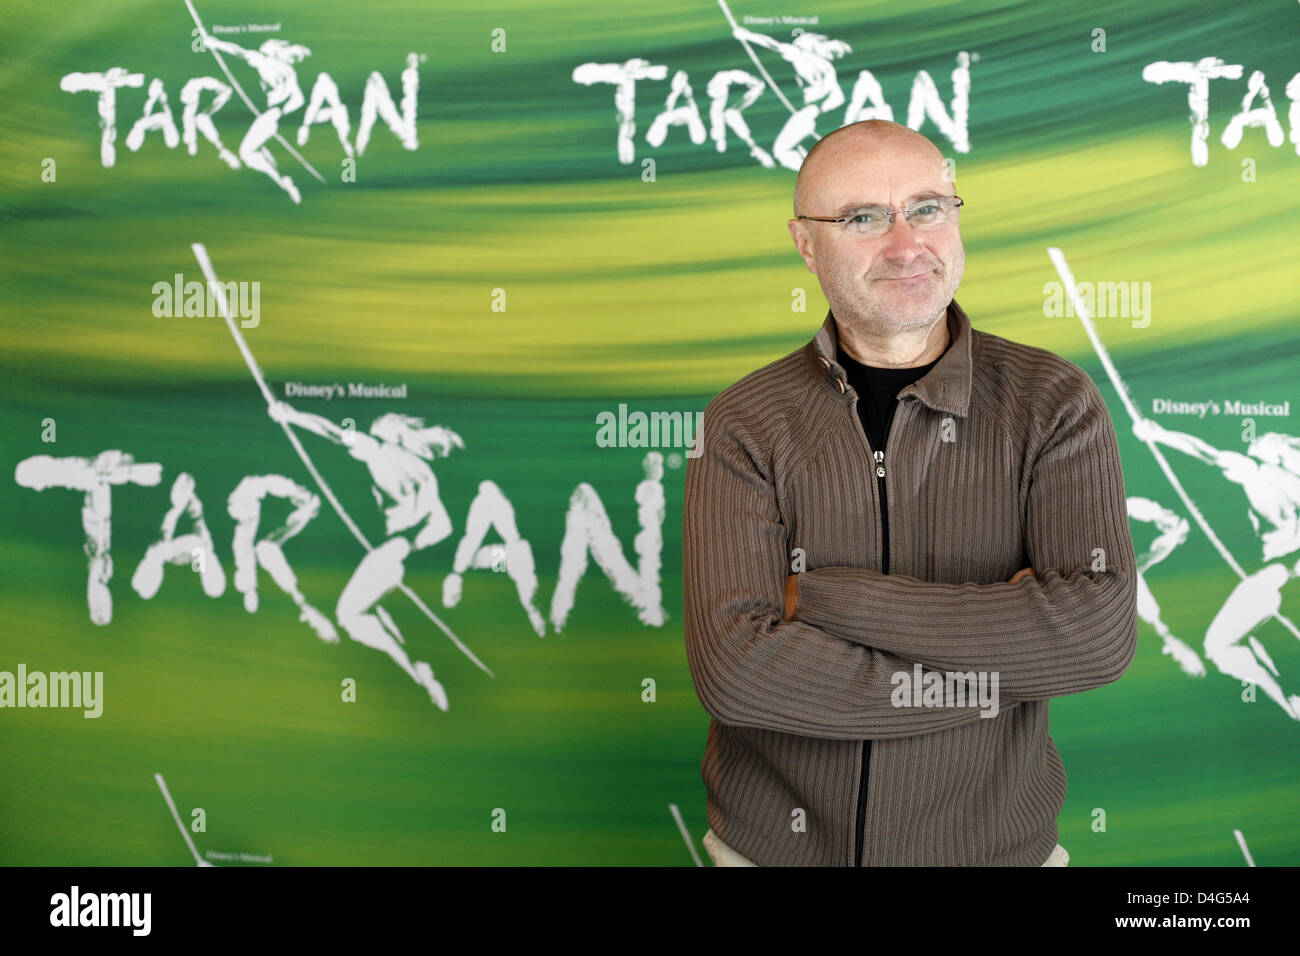 English musician Phil Collins poses with the poster of the new Disney musical 'Tarzan' in Hamburg, Germany, 02 October 2008. The show with music by Collins premieres in Hamburg on 19 October 2008. Photo: SEBASTIAN WIDMANN Stock Photo